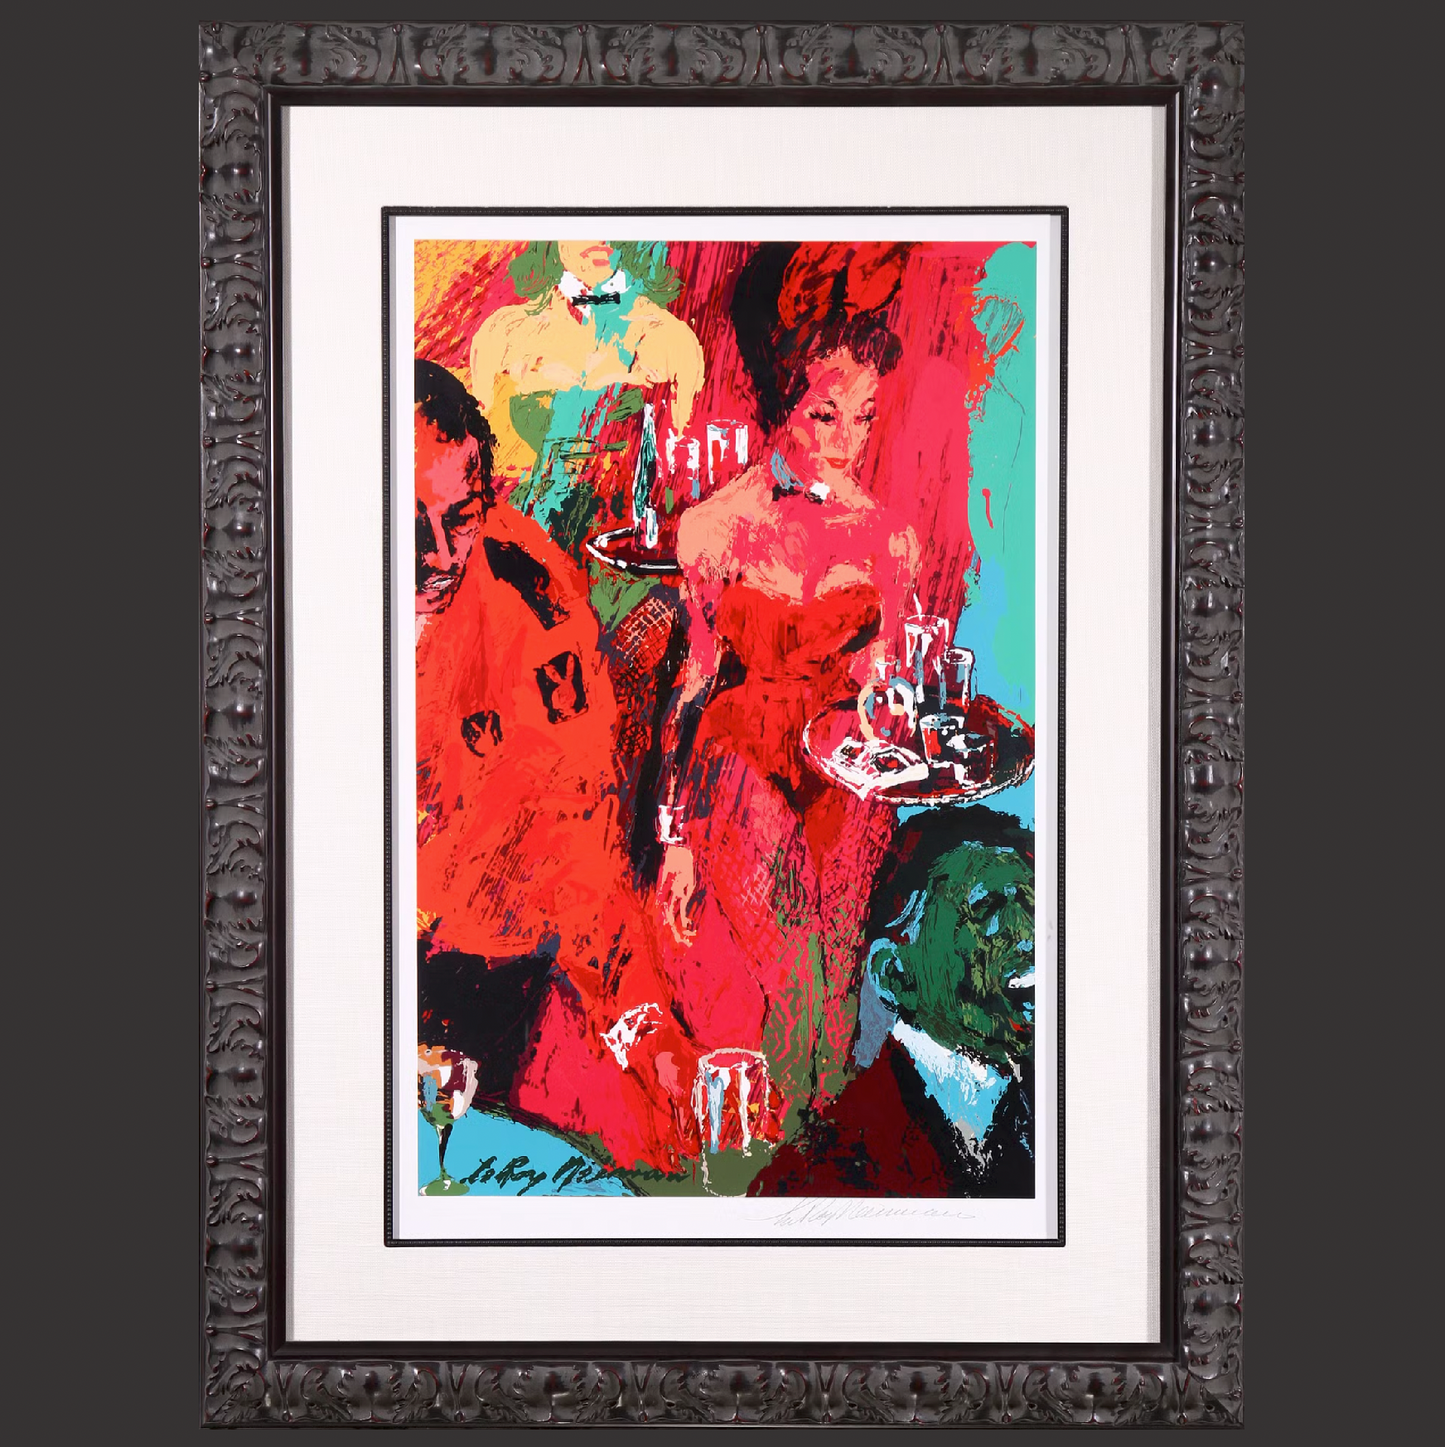 Leroy Neiman 'Playboy Suite' of 1 signed'